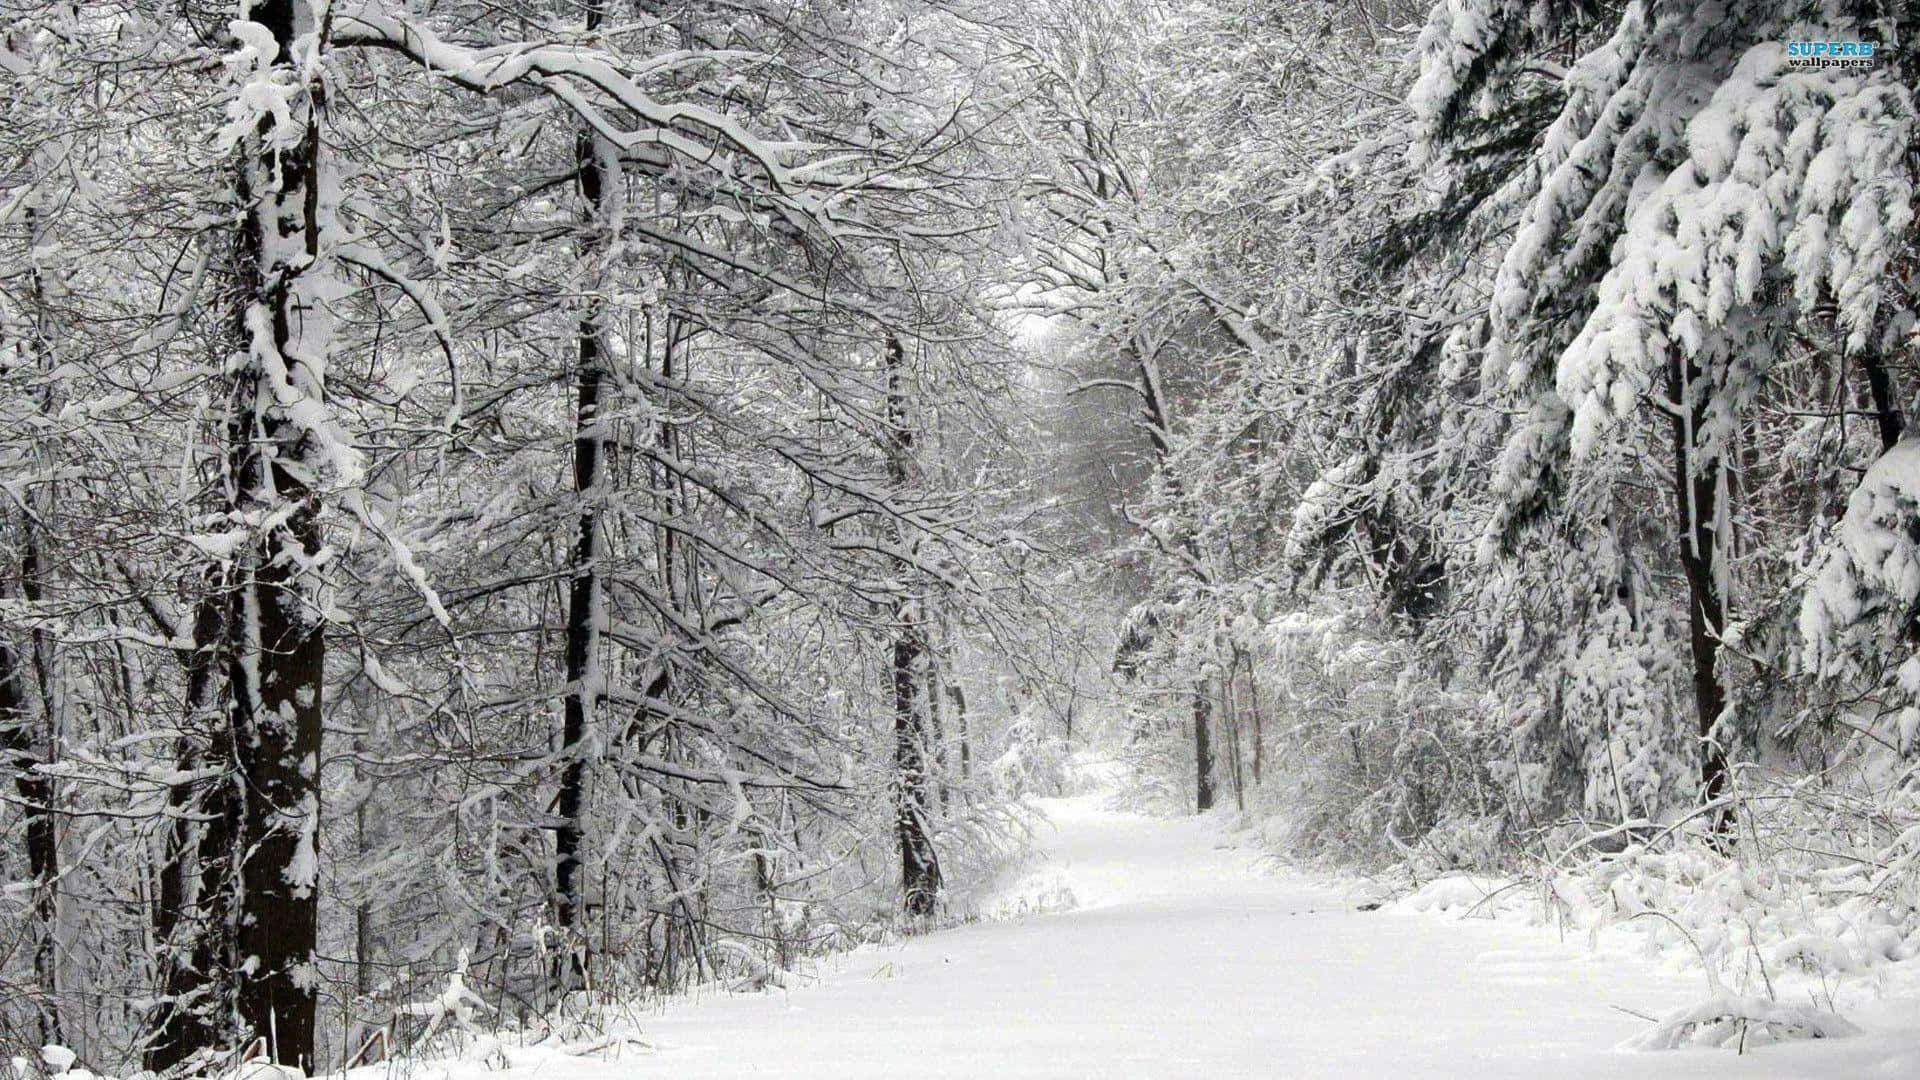 A picturesque snowy forest on a cold winter day.